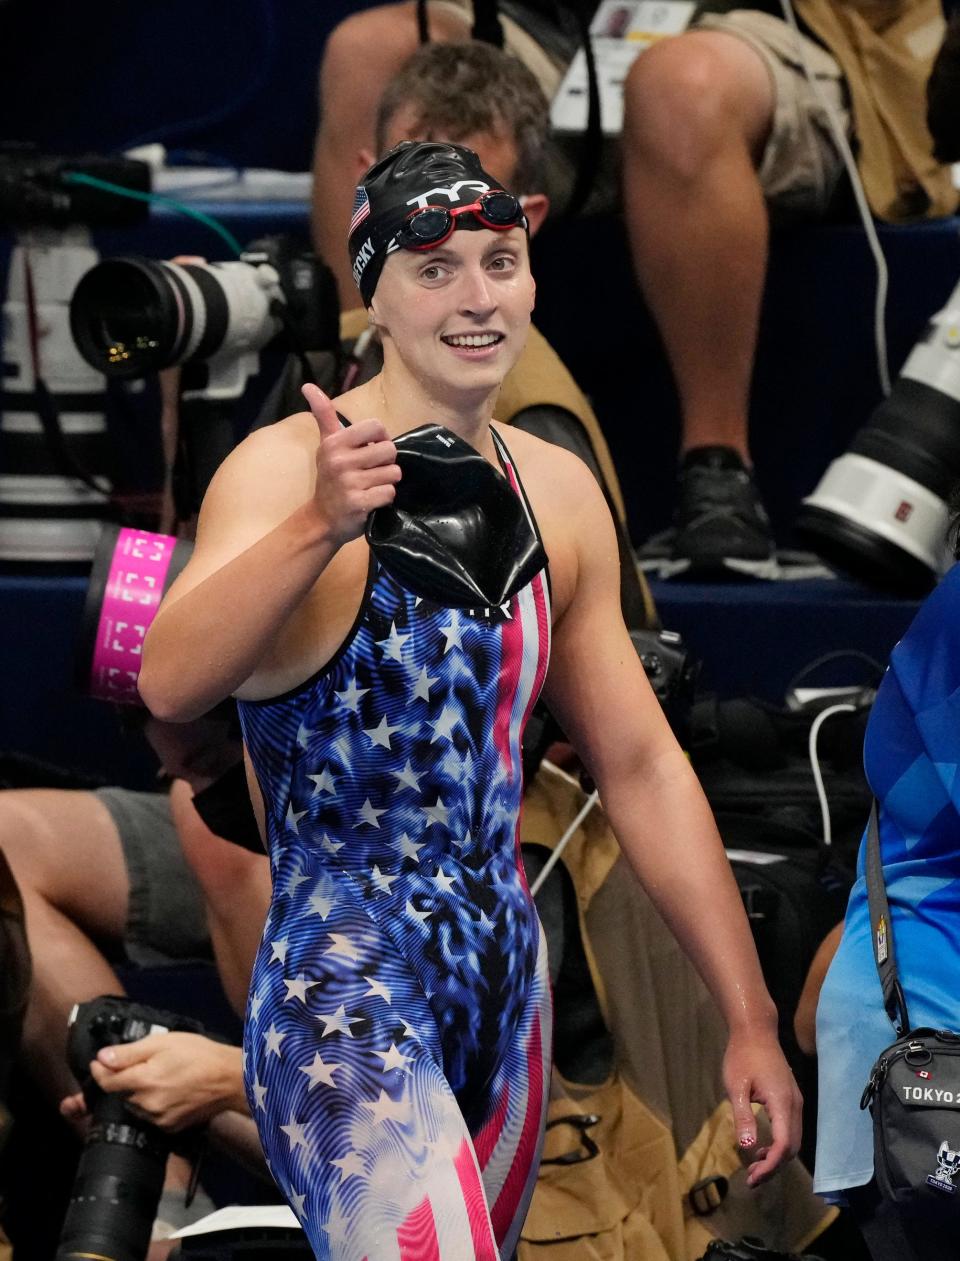 Katie Ledecky reacts after winning the women's 800-meter freestyle at the Tokyo 2020 Olympic Summer Games.